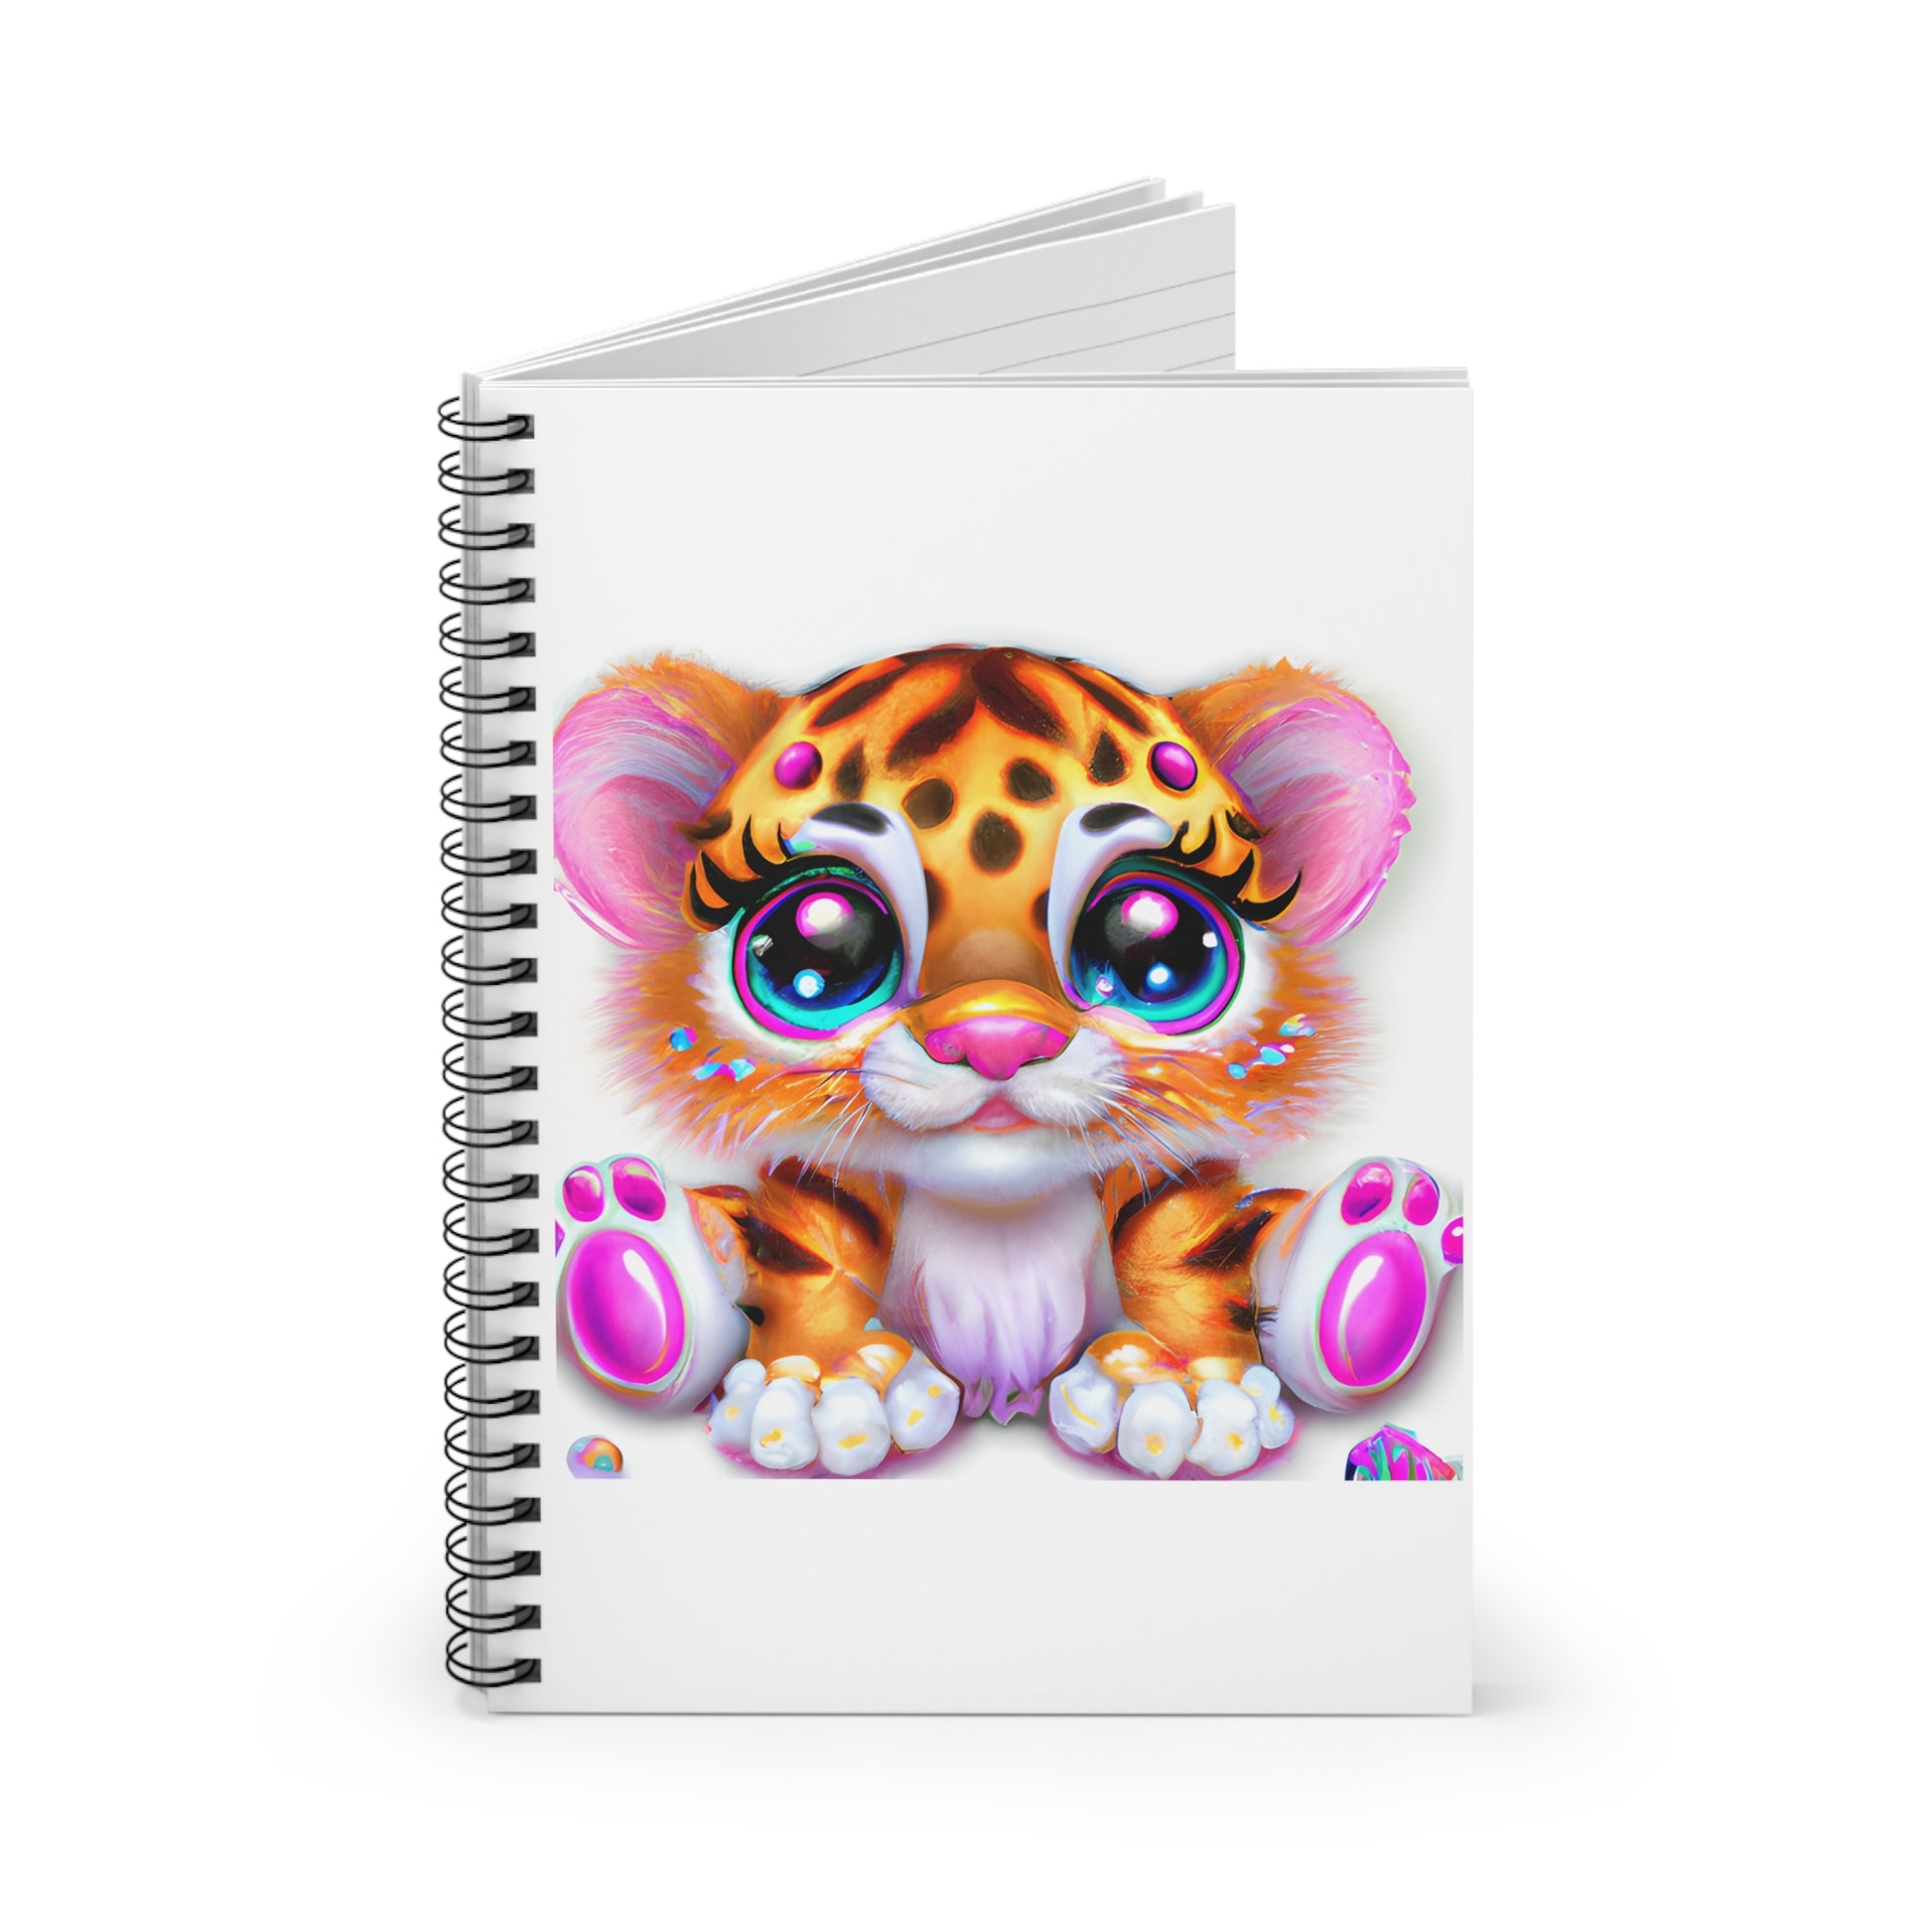 Tiger Cub: Spiral Notebook - Log Books - Journals - Diaries - and More Custom Printed by TheGlassyLass.com